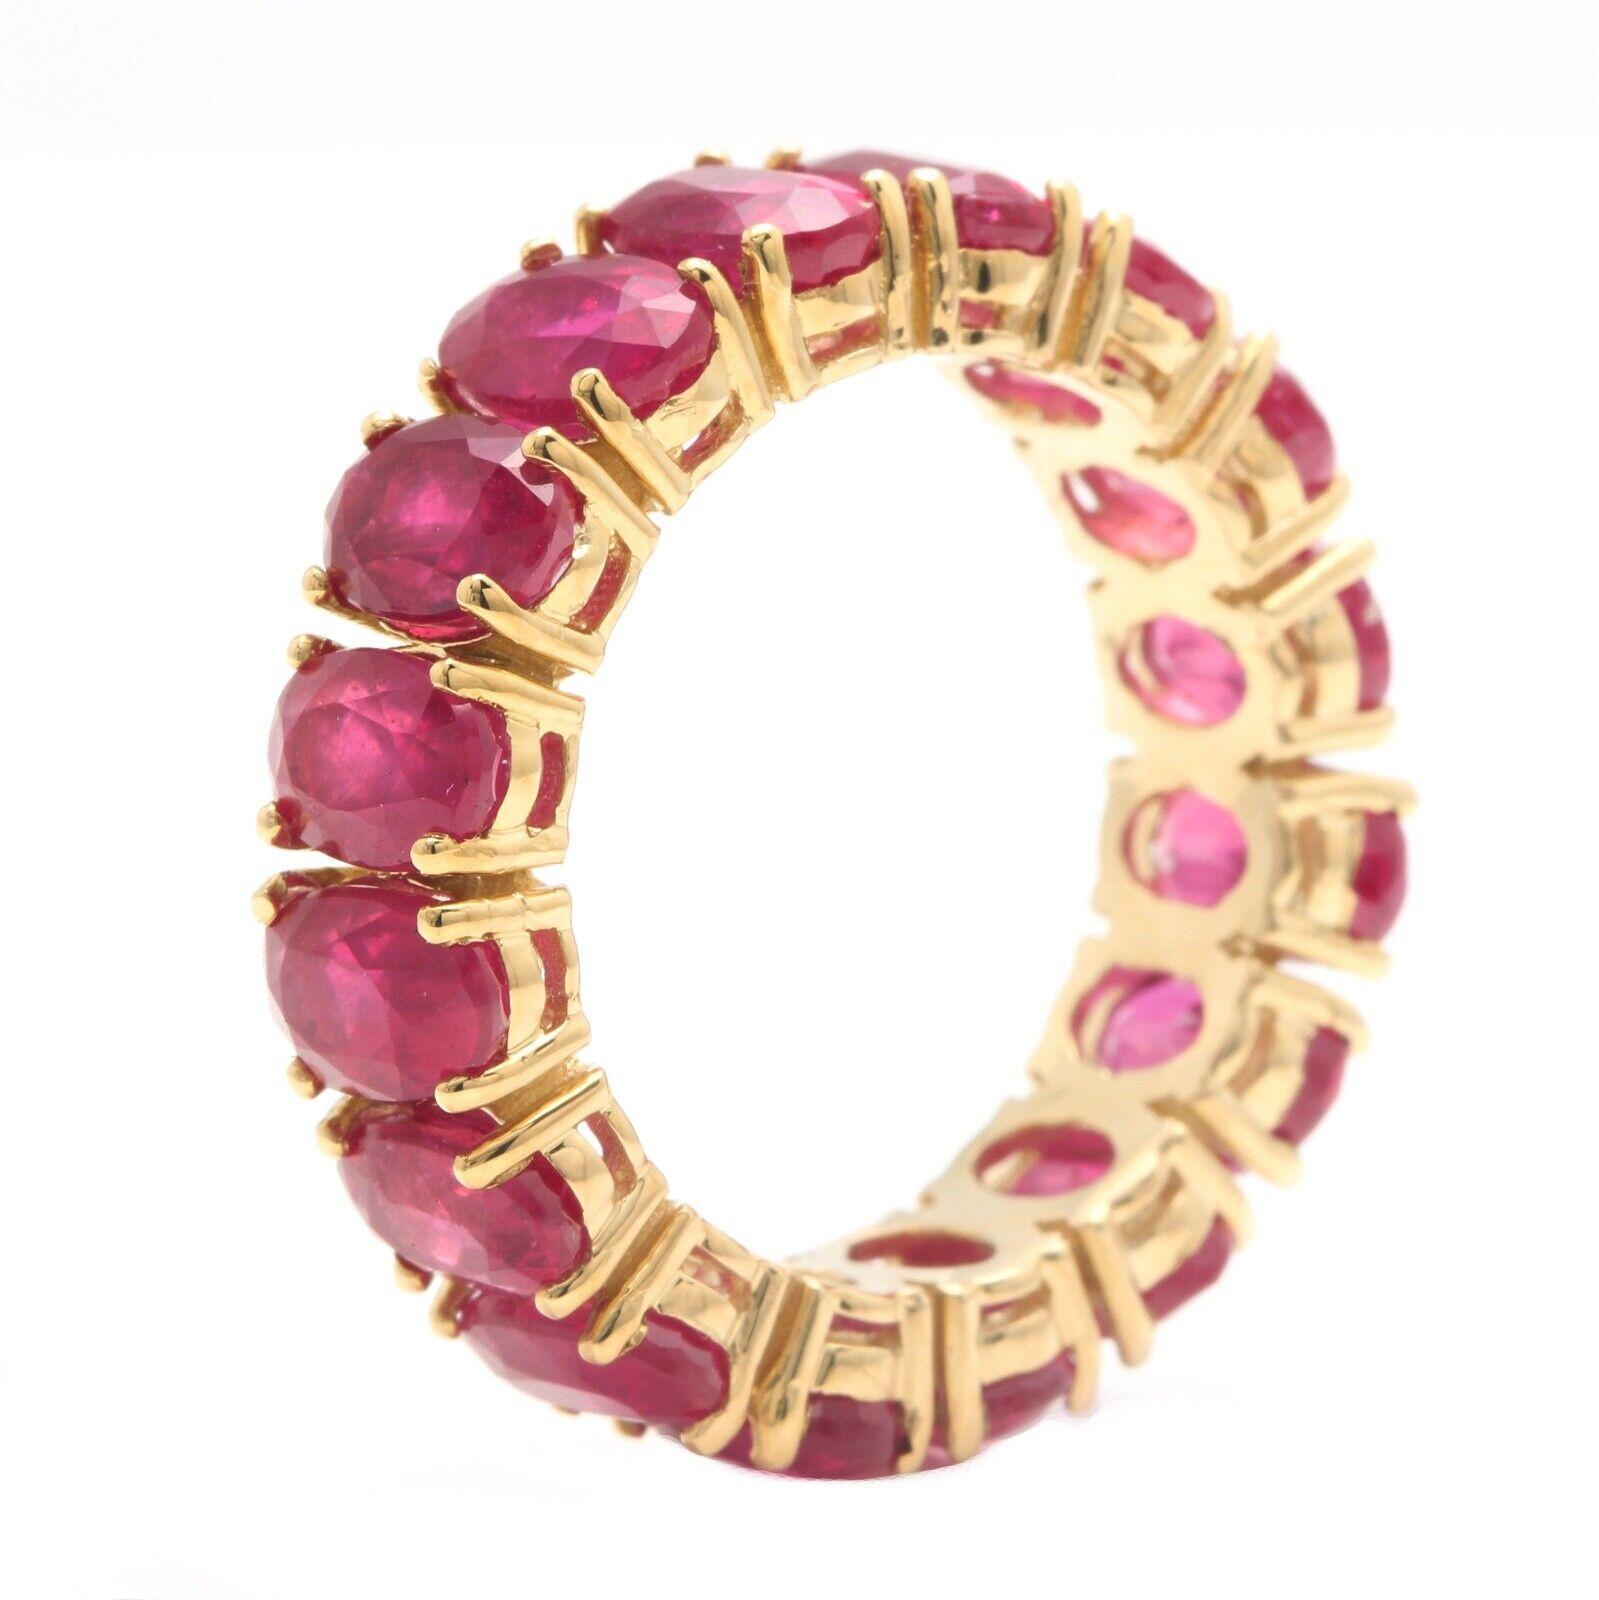 9.50 Carats Natural Ruby 14K Solid Yellow Gold Eternity Ring

Natural Round Ruby Weight is: Approx. 9.50 Carats 

Ruby Measures: Approx. 6 x 4mm

Ruby Treatment: Fracture Filing

Ring size: 7 

Ring total weight: 6.5 grams

Disclaimer: all weights,